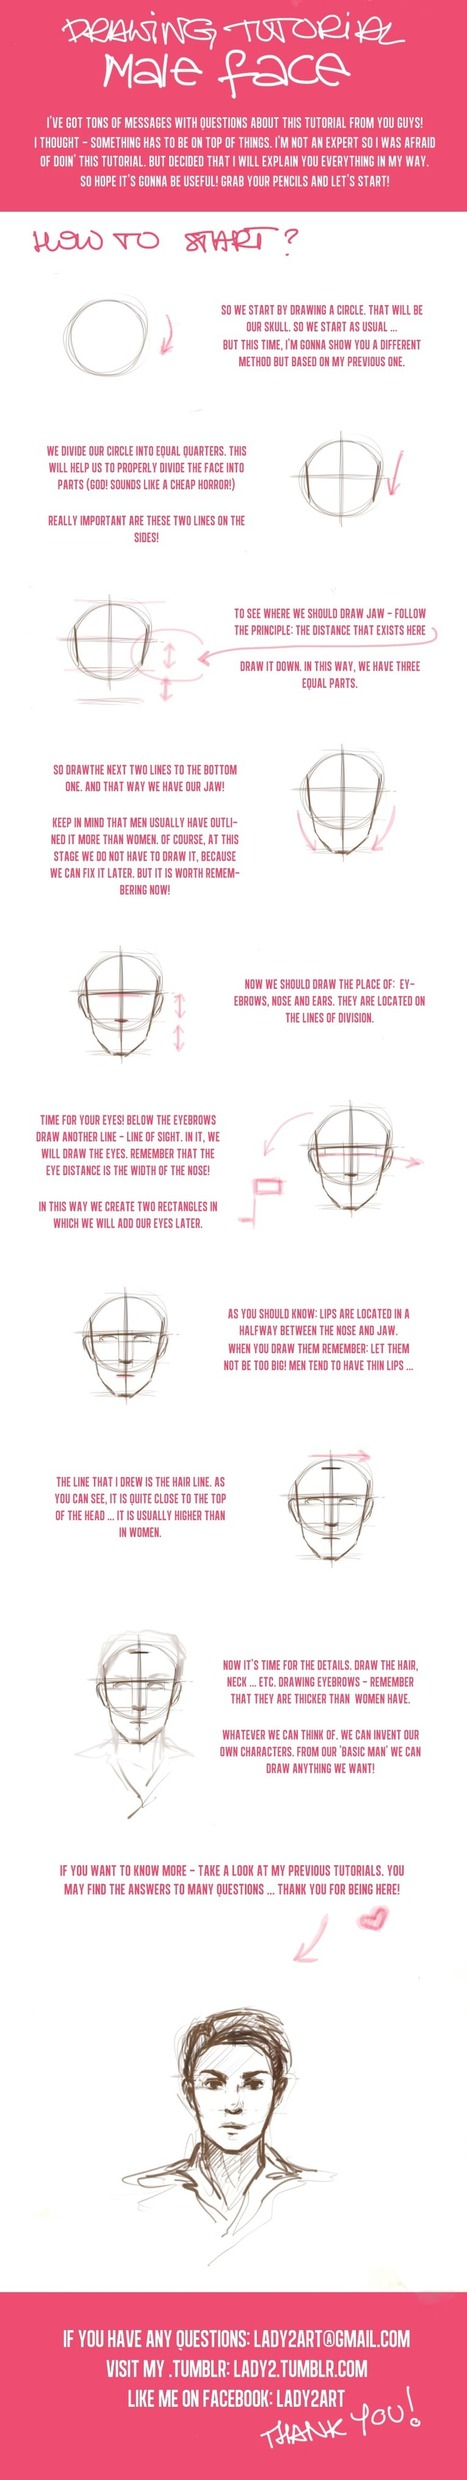 Head Drawing Reference Guide | Drawing References and Resources | Scoop.it